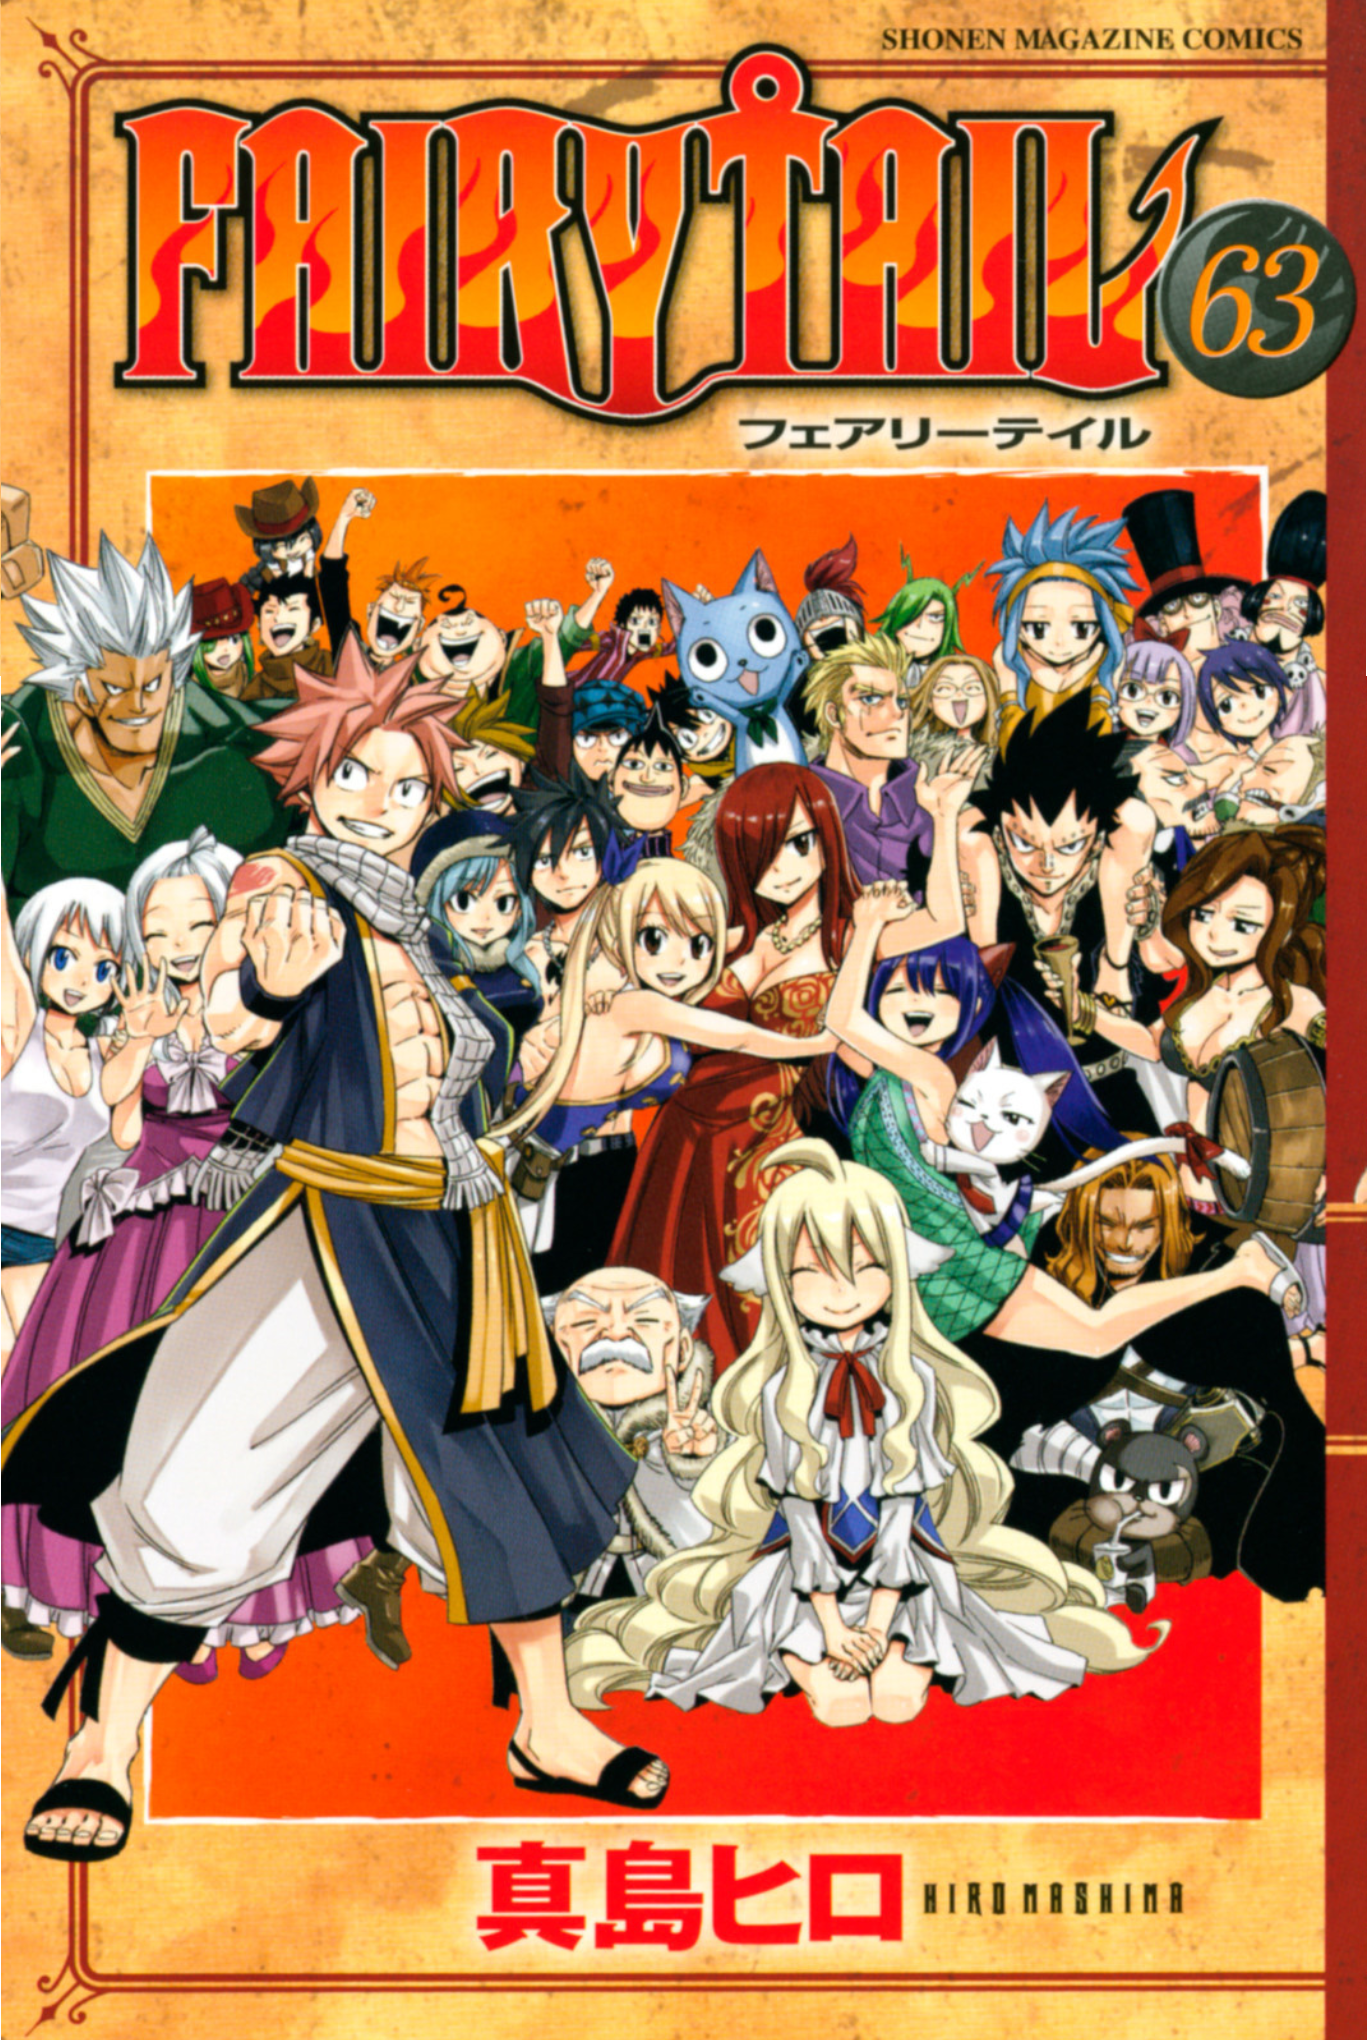 https://vignette.wikia.nocookie.net/fairytail/images/b/b1/Volume_63_Cover.png/revision/latest?cb=20180322182545